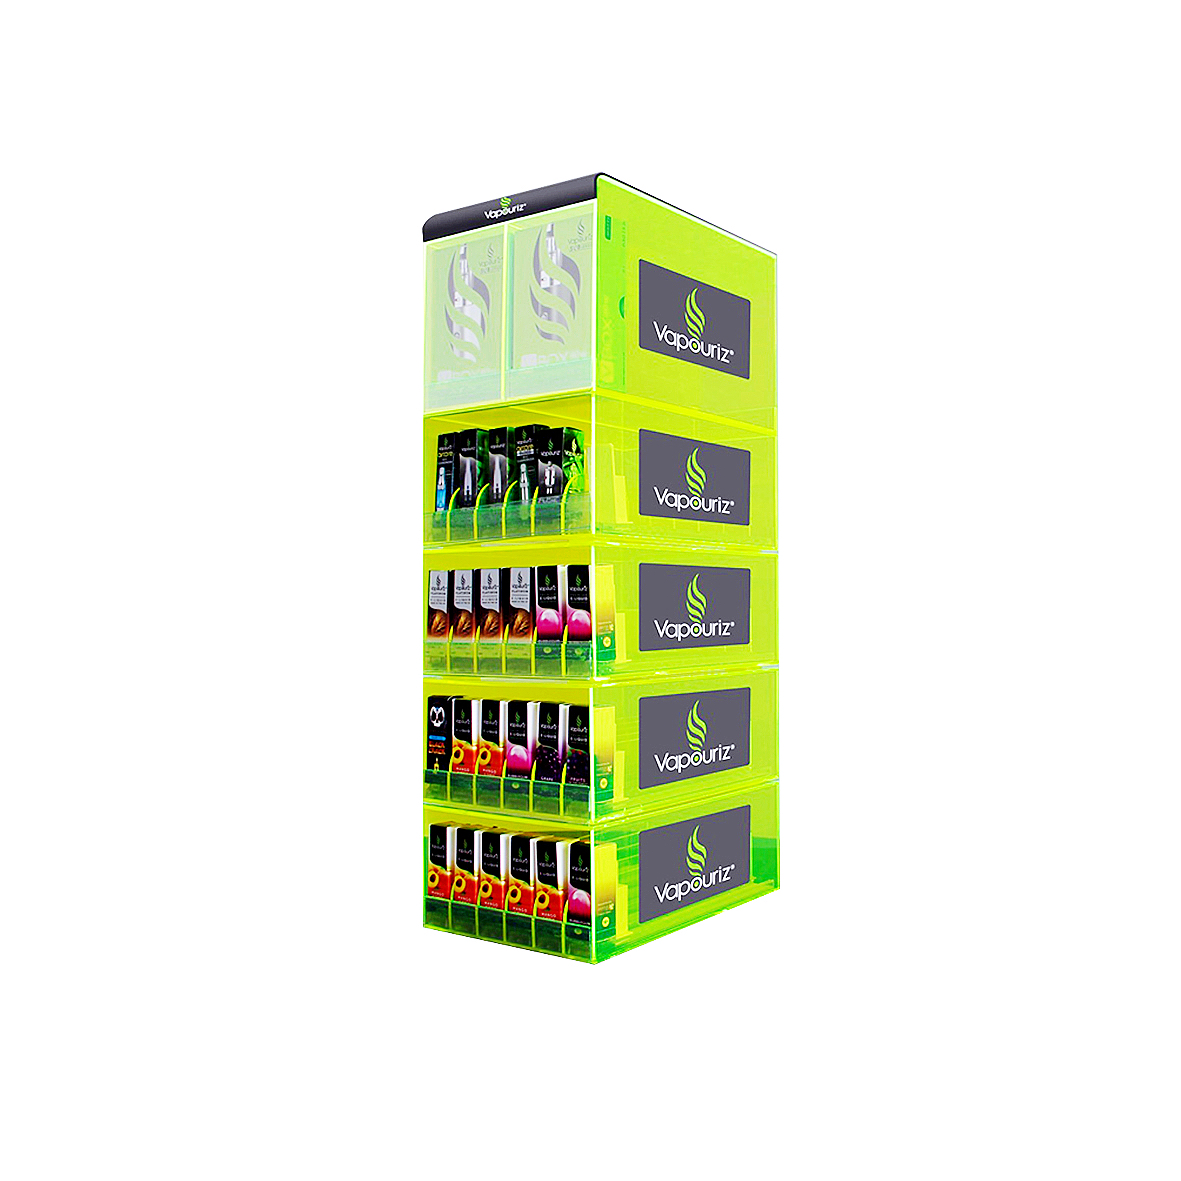 The E-Cigarette Industry Use Display stand To Build Brand